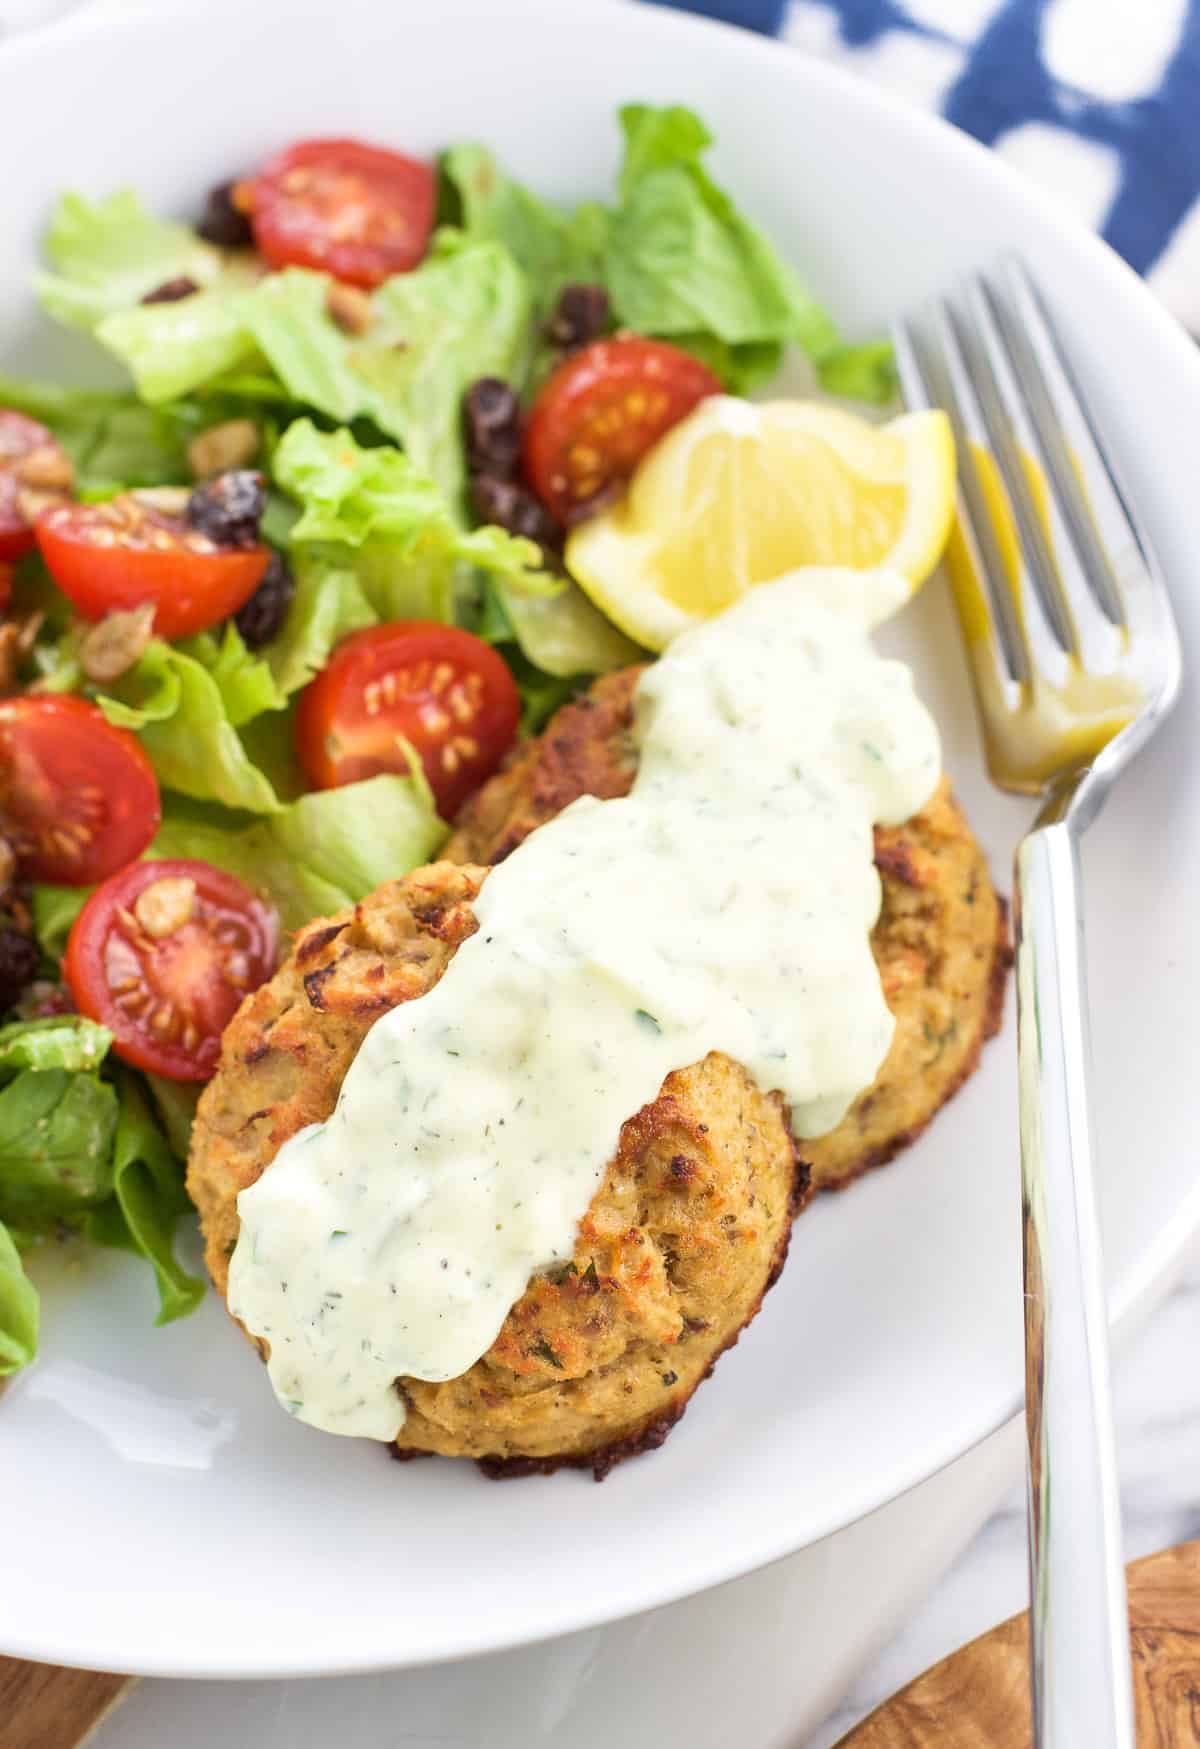 Baked tuna cakes on a plate with a salad.